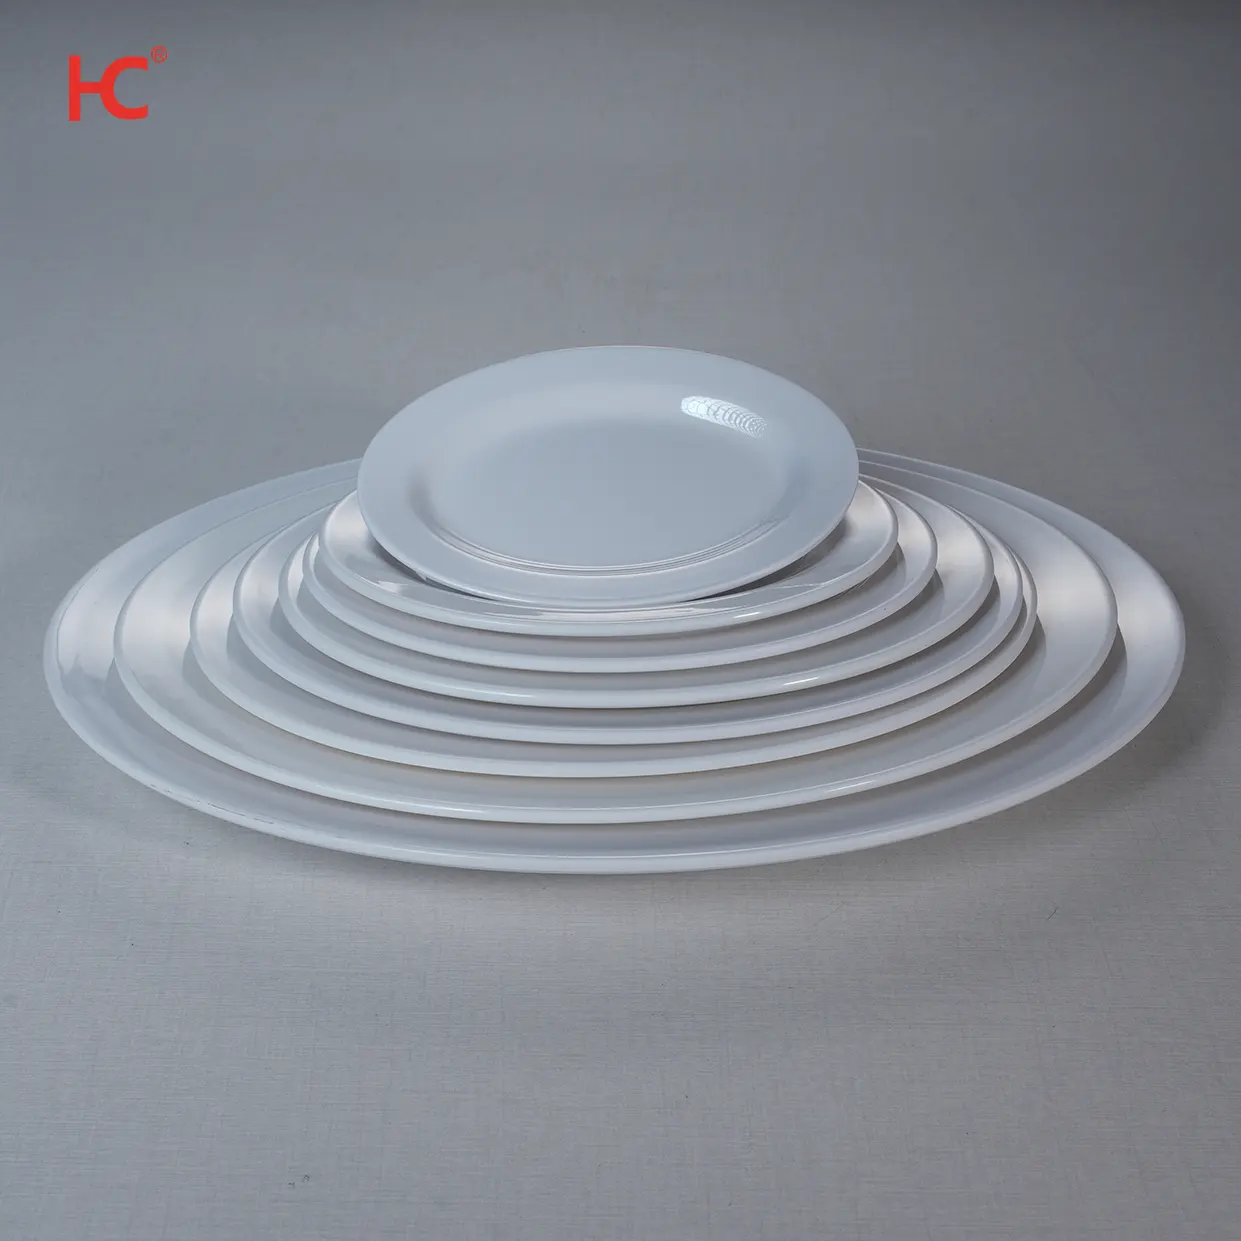 Customizable 8-Inch Melamine Oval Tray Dish Sustainable Fast Food Restaurant Cookware Modern Design Plastic Plates